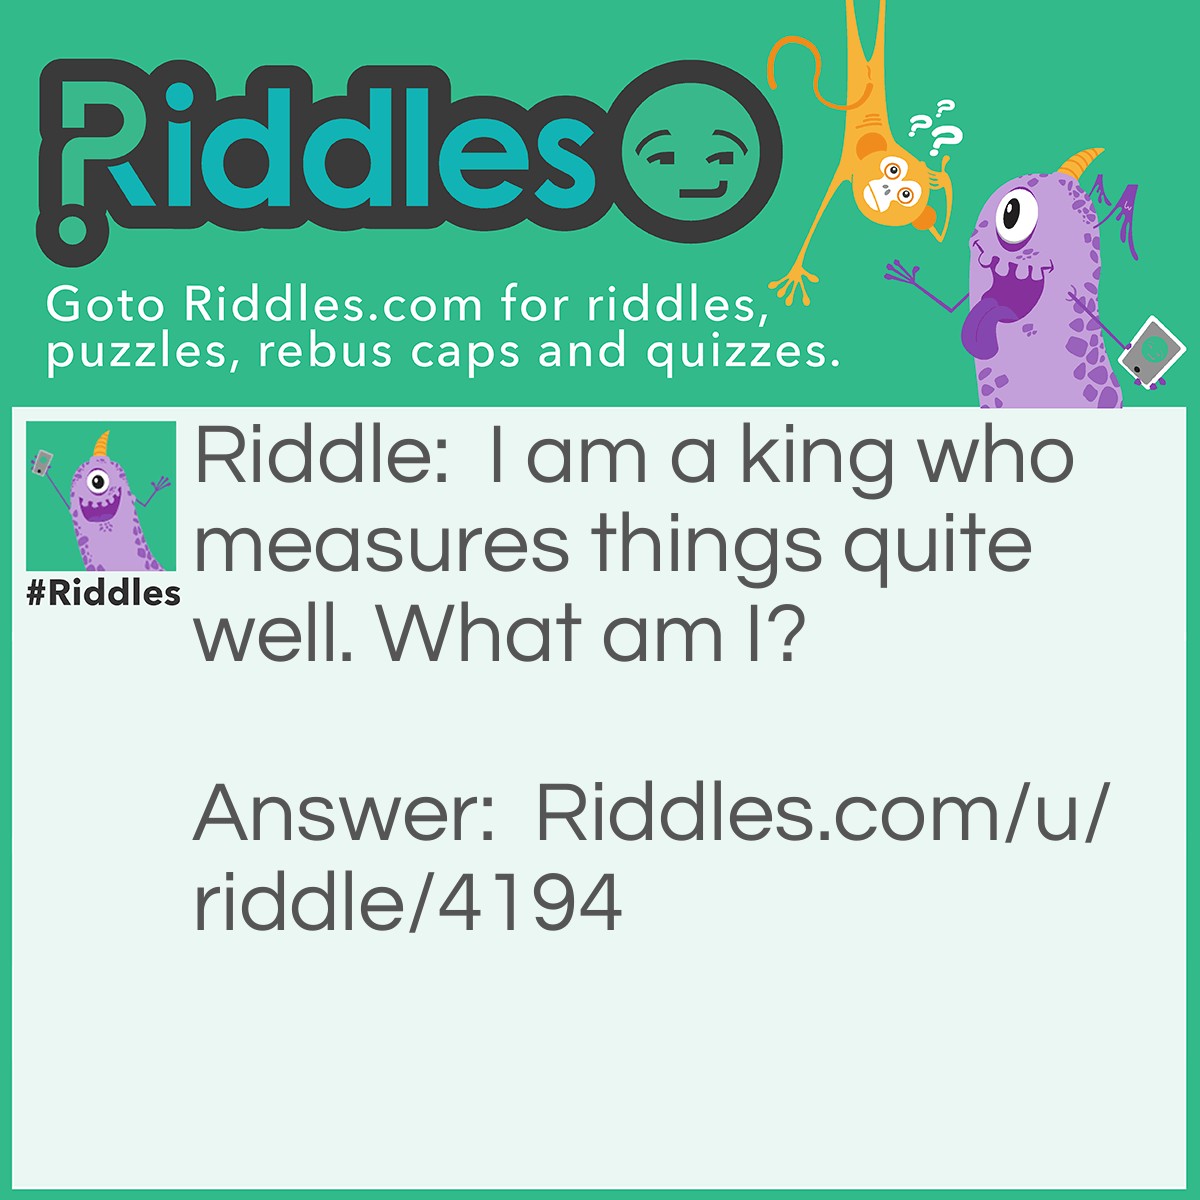 Riddle: I am a king who measures things quite well. What am I? Answer: A ruler.